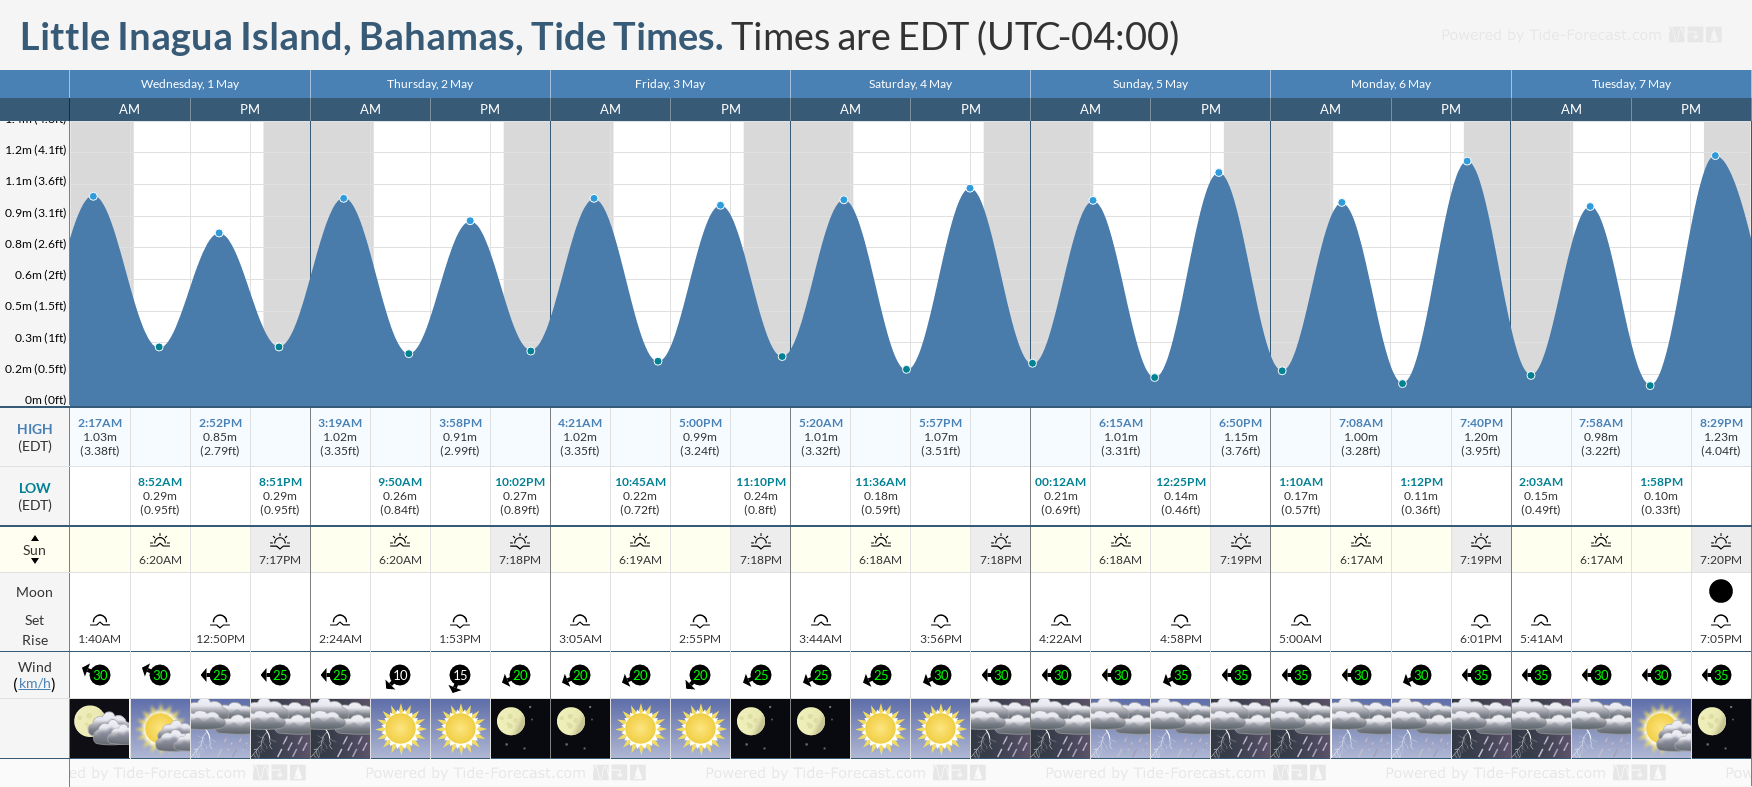 Little Inagua Island, Bahamas Tide Chart including high and low tide tide times for the next 7 days